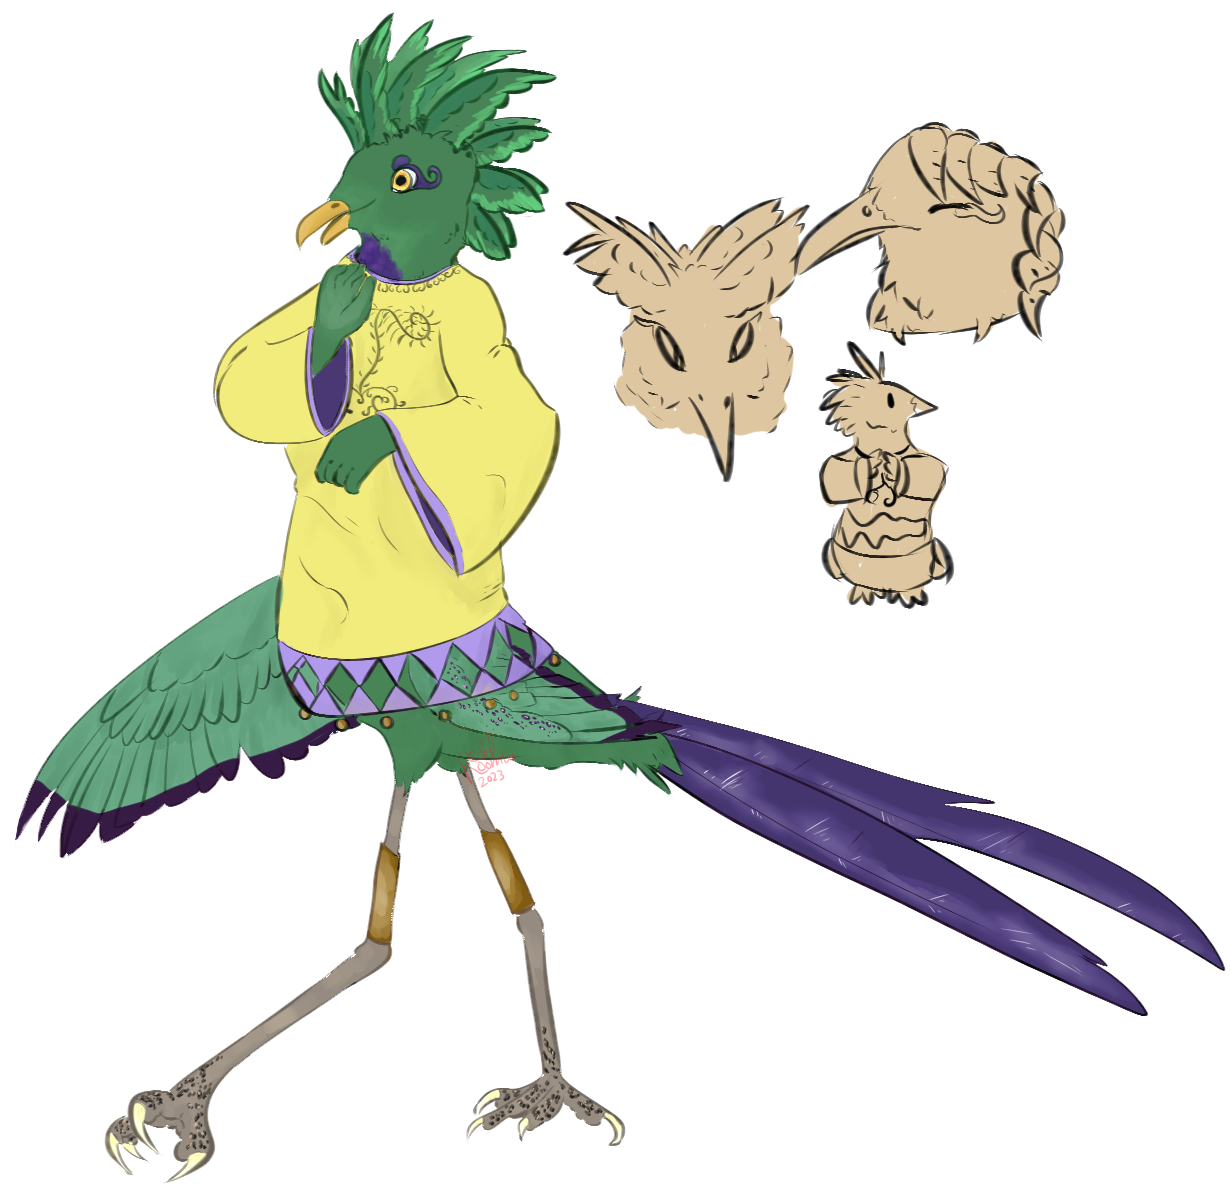 A green skinned woman with a bird's head and lower body. The crest on her head is made of many small wings, and she has two long purple tail feathers. She is wearing a simple yellow robe with purple and gold details. To the side are 3 doodles showing facial expressions. 